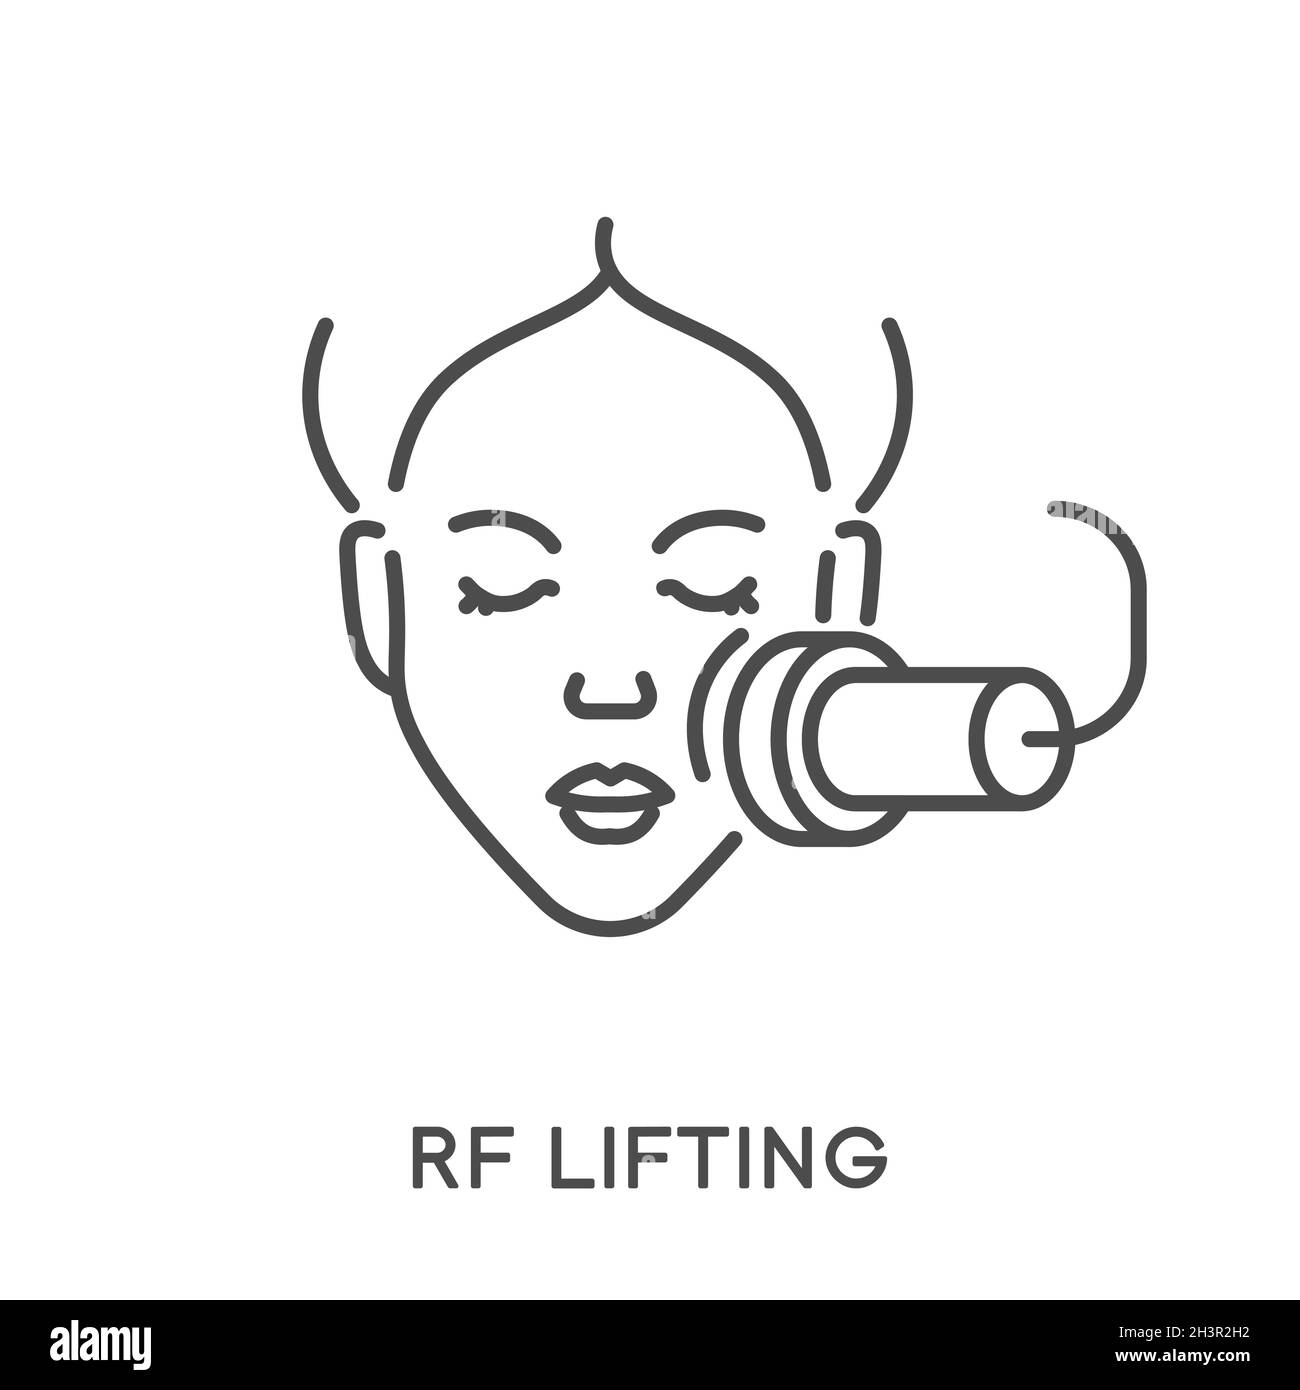 Woman face rf lifting, beauty procedure and rejuvenation isolated icon Stock Vector